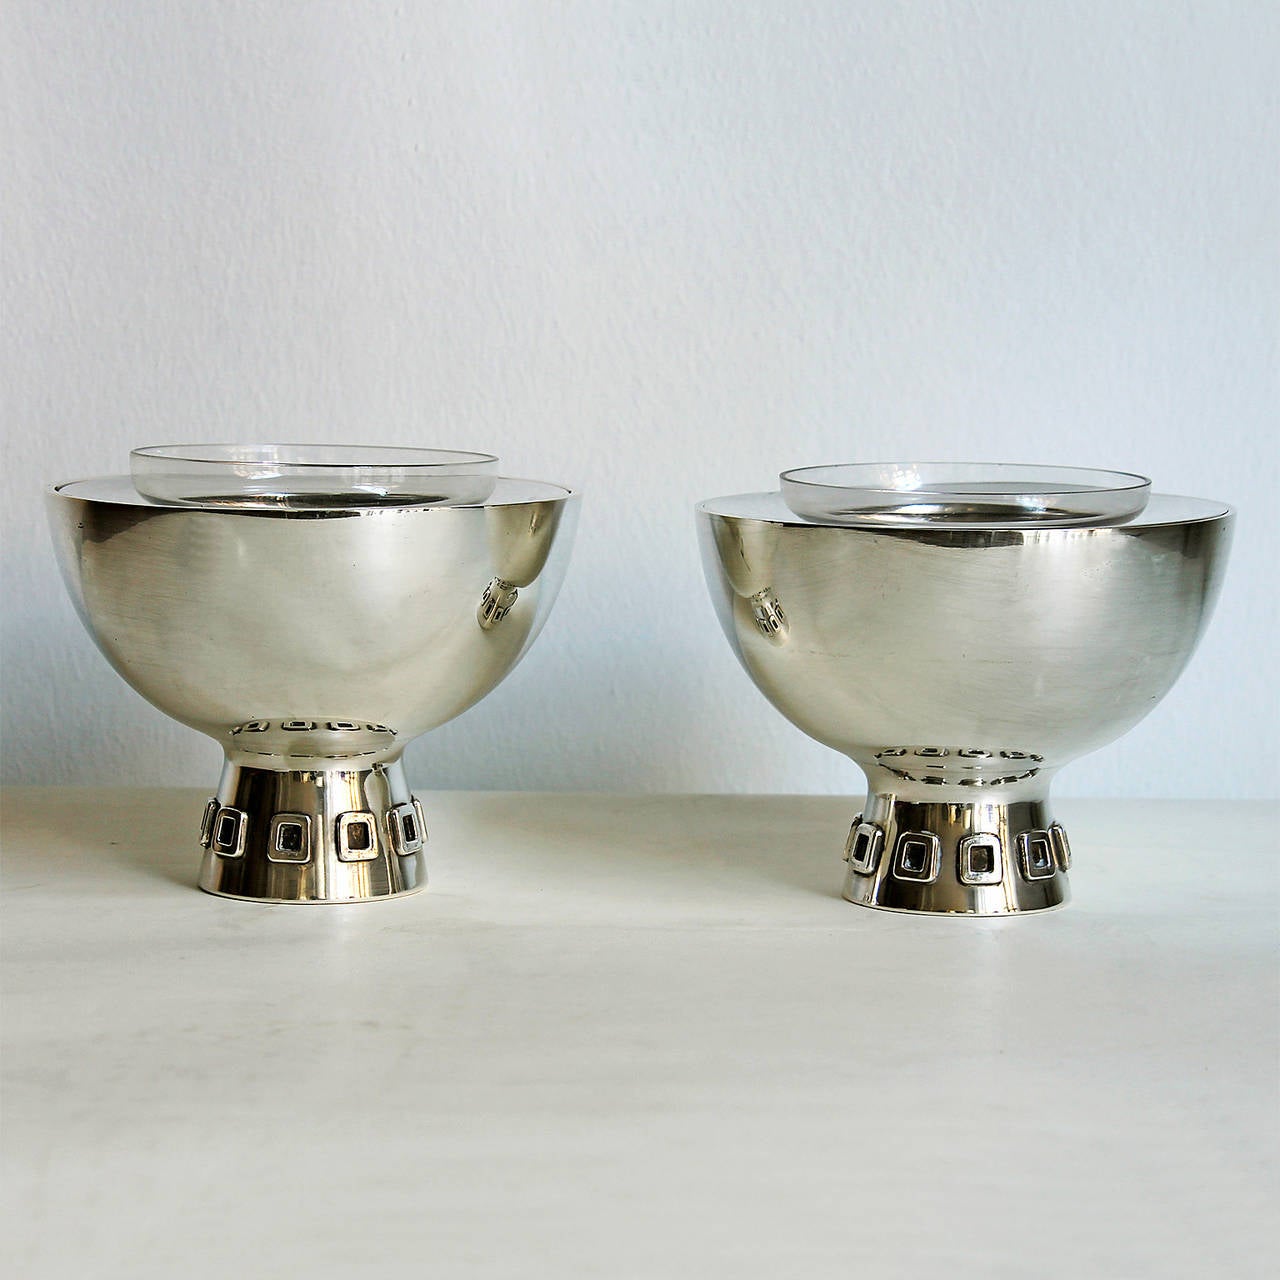 Pair of caviar bowls, sterling silver with glass little bowls, square decoration on base.
Stamp: Star (Sterling silver in Spain since 1934)
Weight: 287 grms (without glass) each
Design: Puig Doria
Spain, Barcelona, circa 1960.